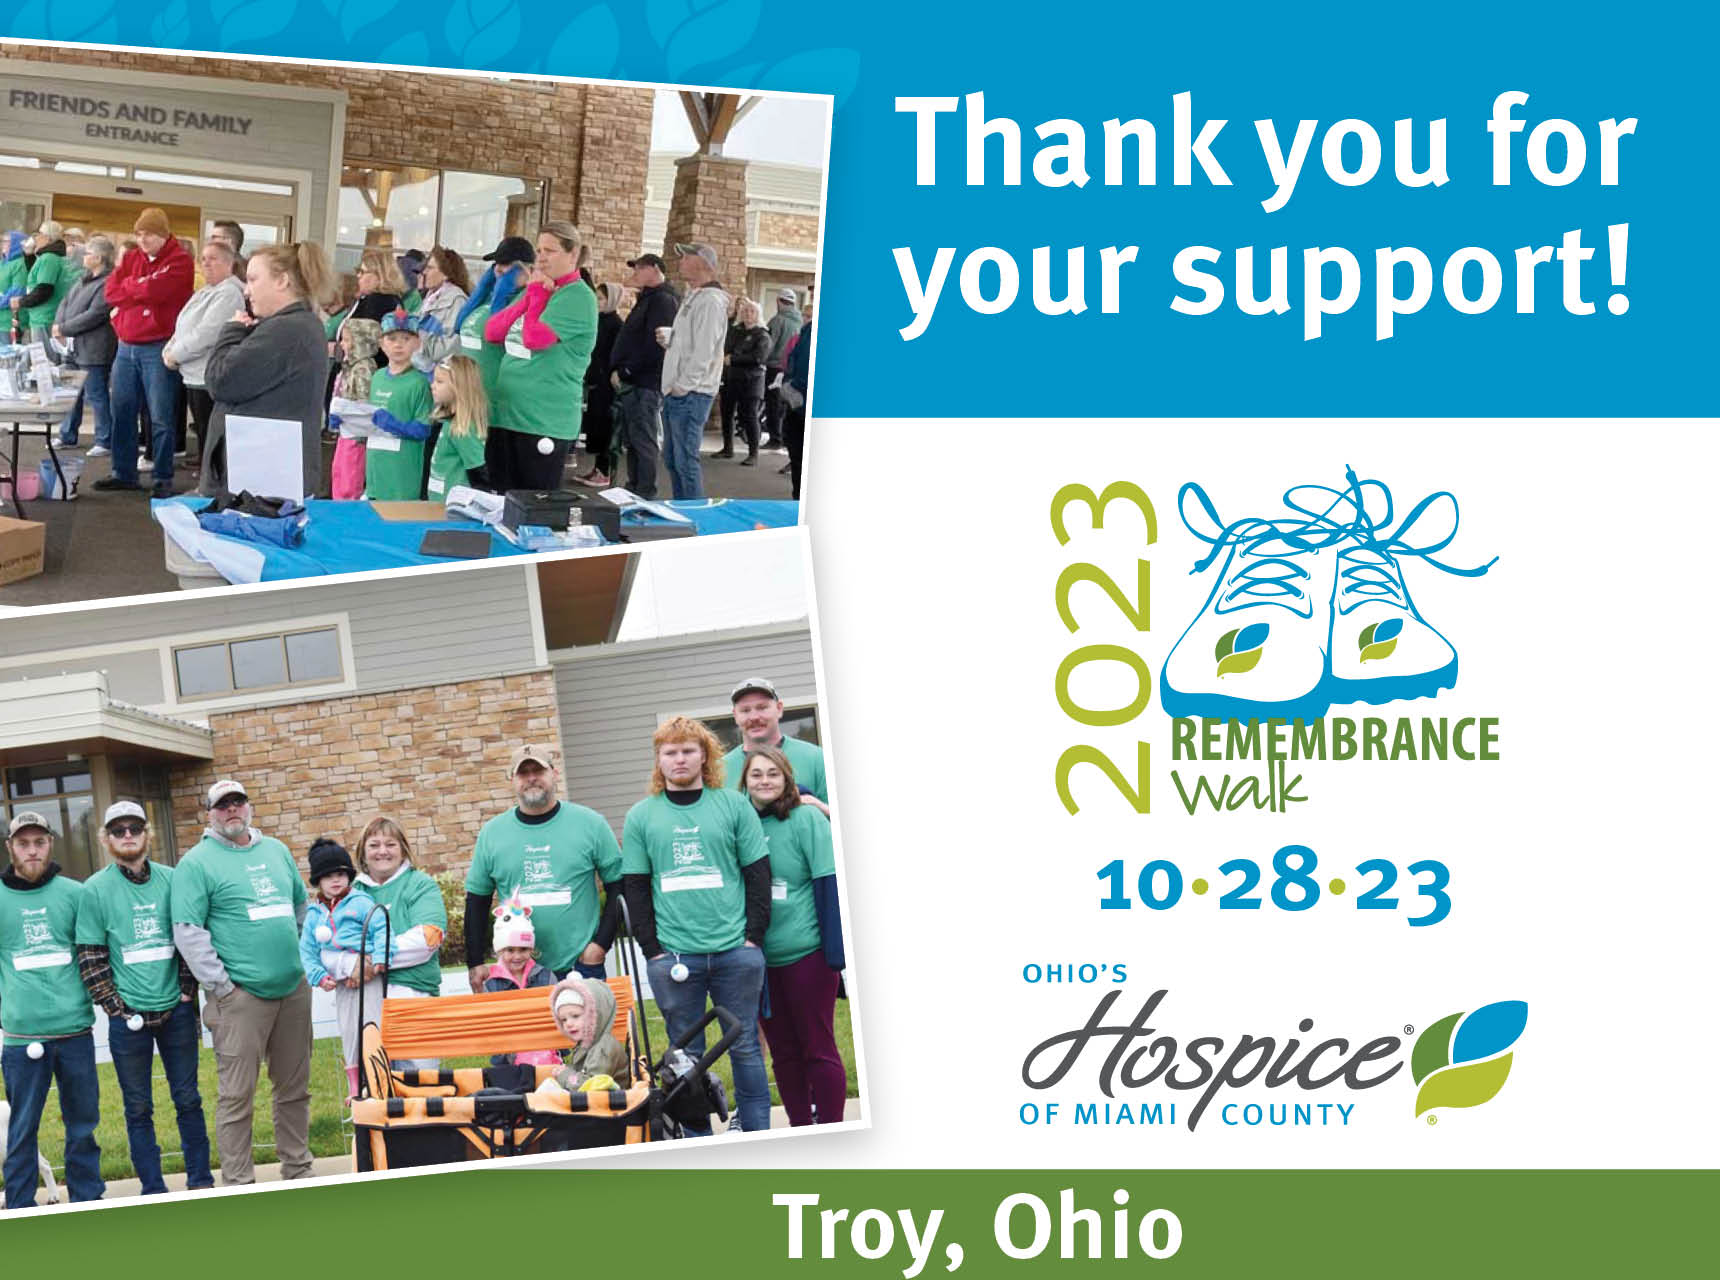 Thank you for your support. Ohio's Hospice of Miami County Remembrance Walk.